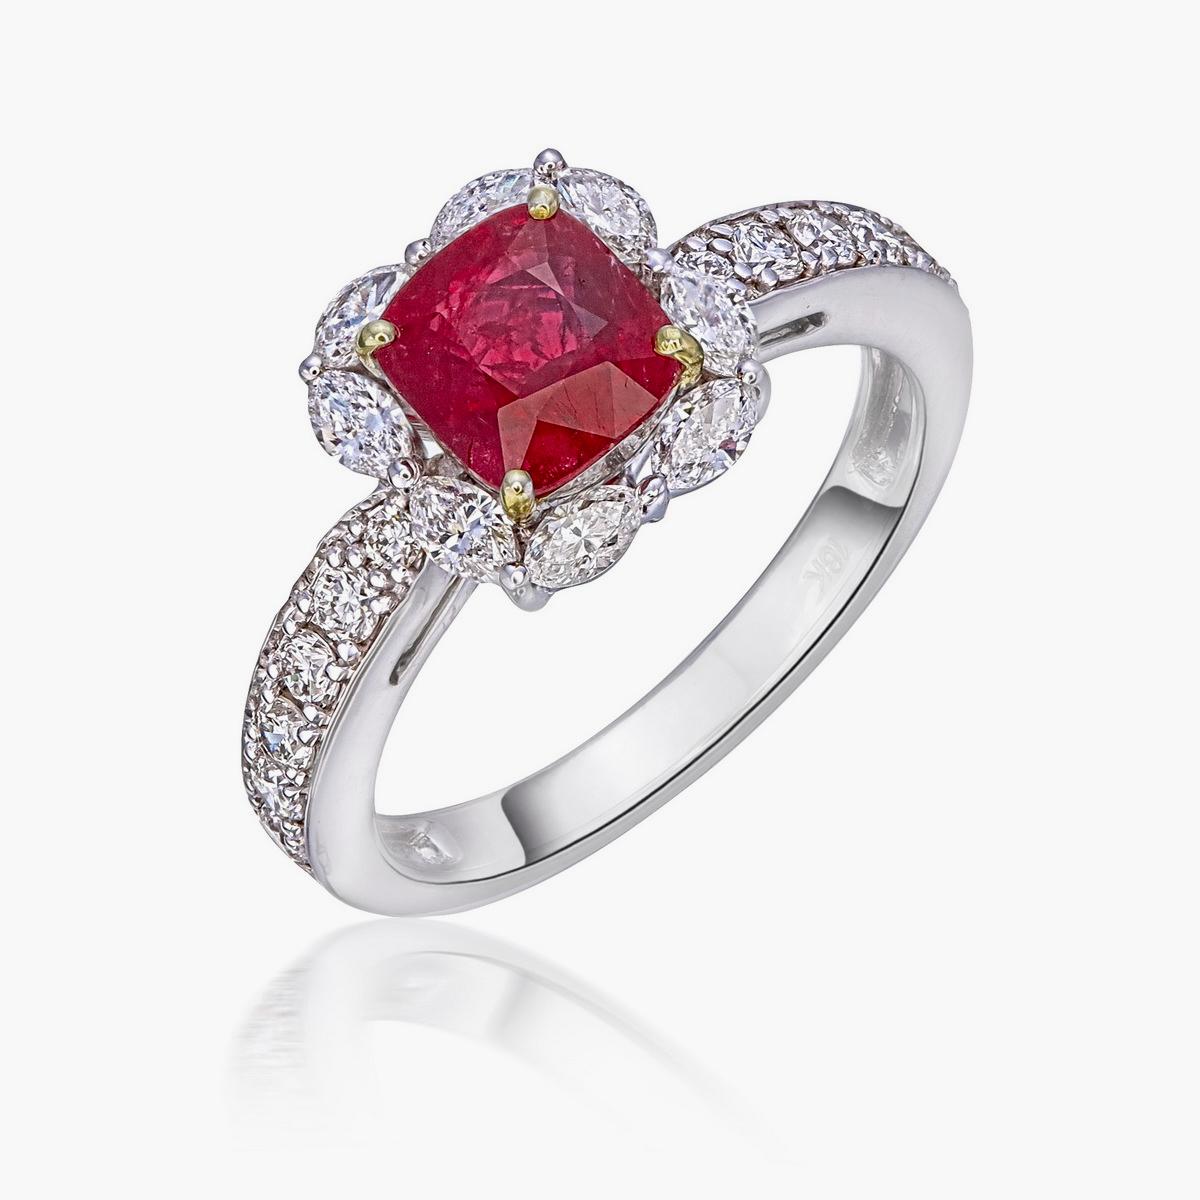 A ‘Pigeon Blood’ red hue ruby and diamond solitaire ring made in 18 Karat gold. A classic design that is a good fit for everyday use and for special occasions.  

    The center stone is a cushion shaped 1.43 carat GRS certified ‘Pigeon Blood’ red